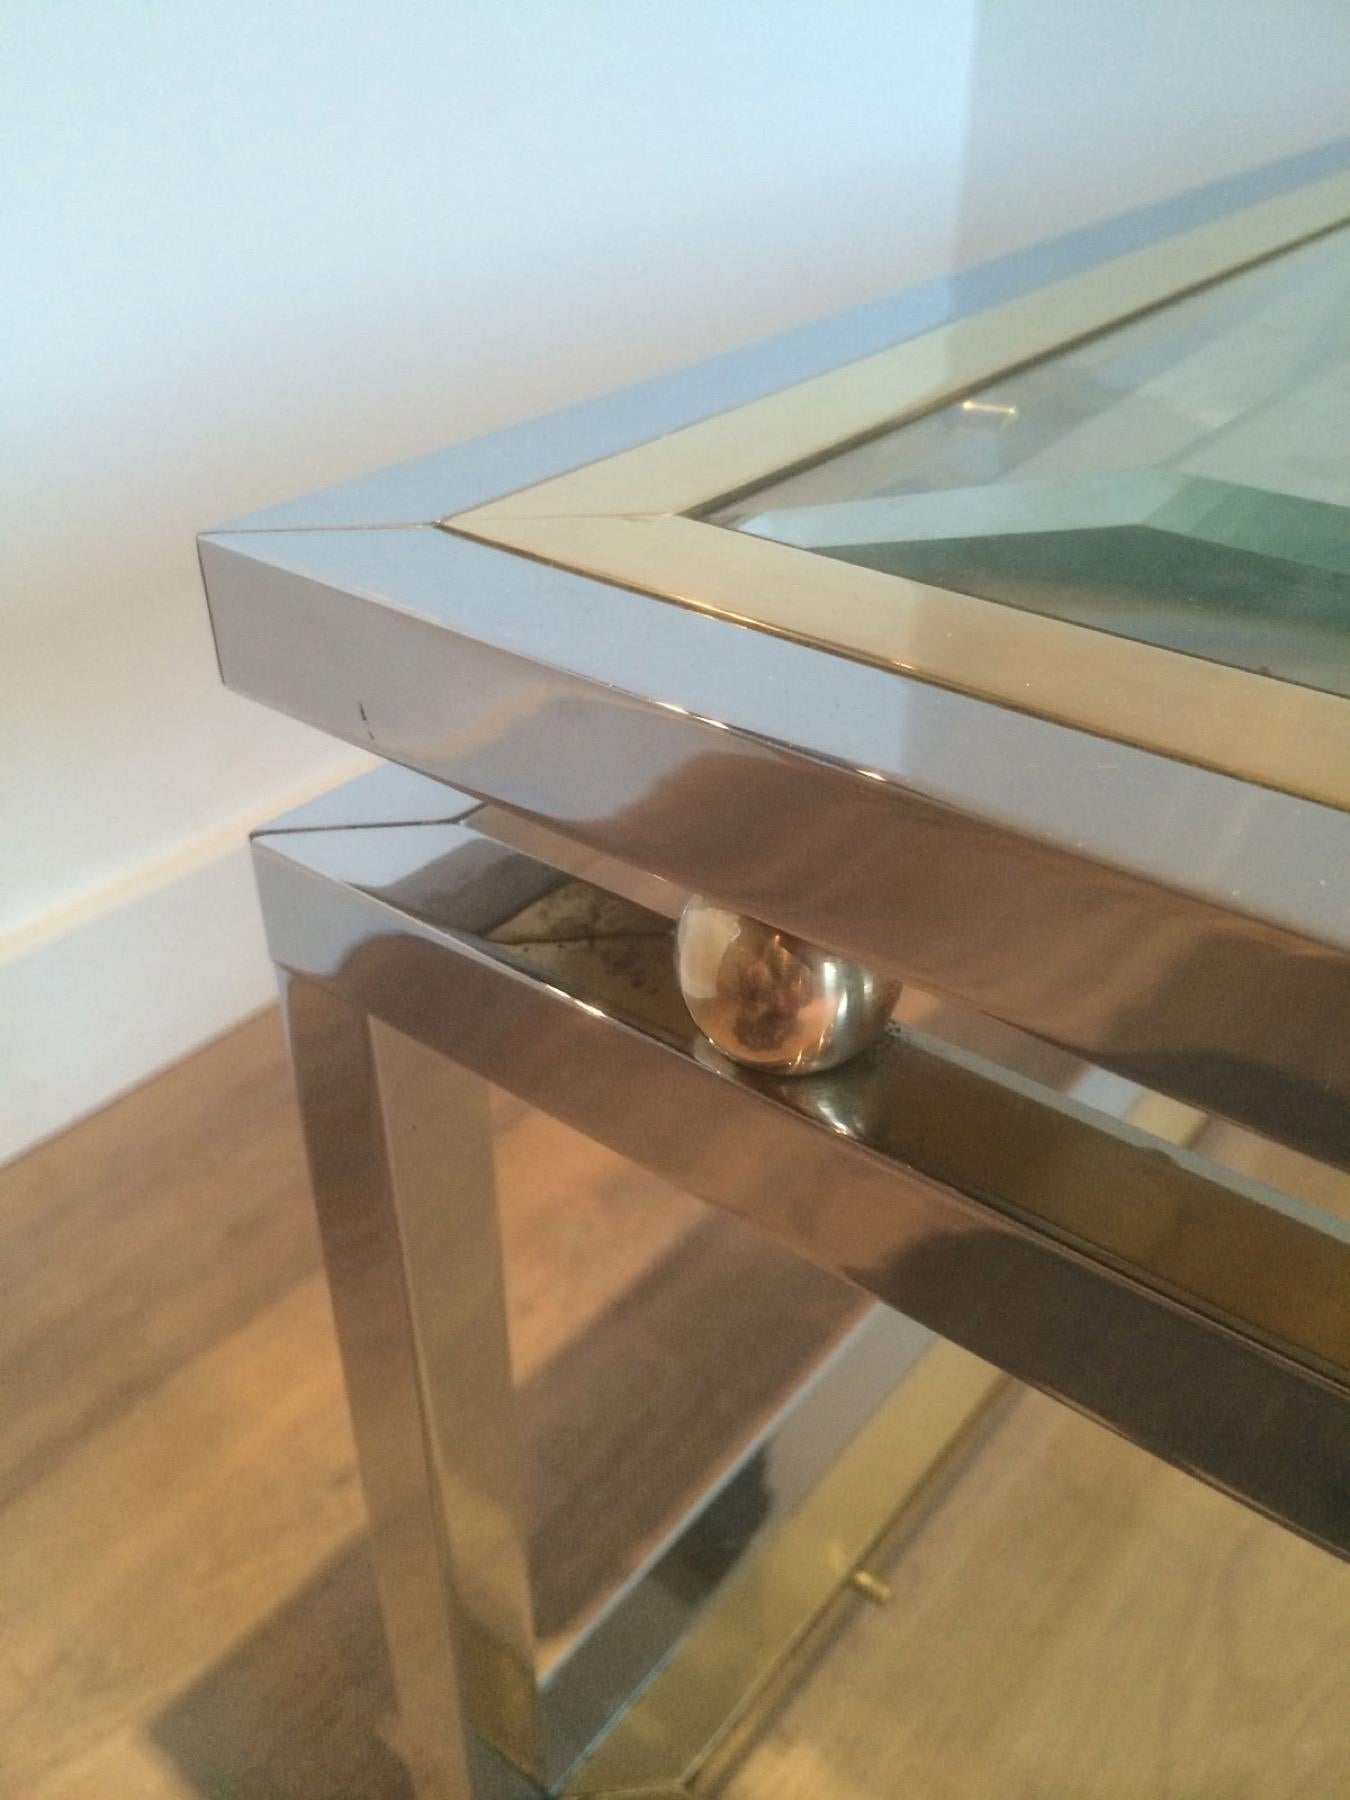 Late 20th Century Chrome and Brass Coffee Table For Sale